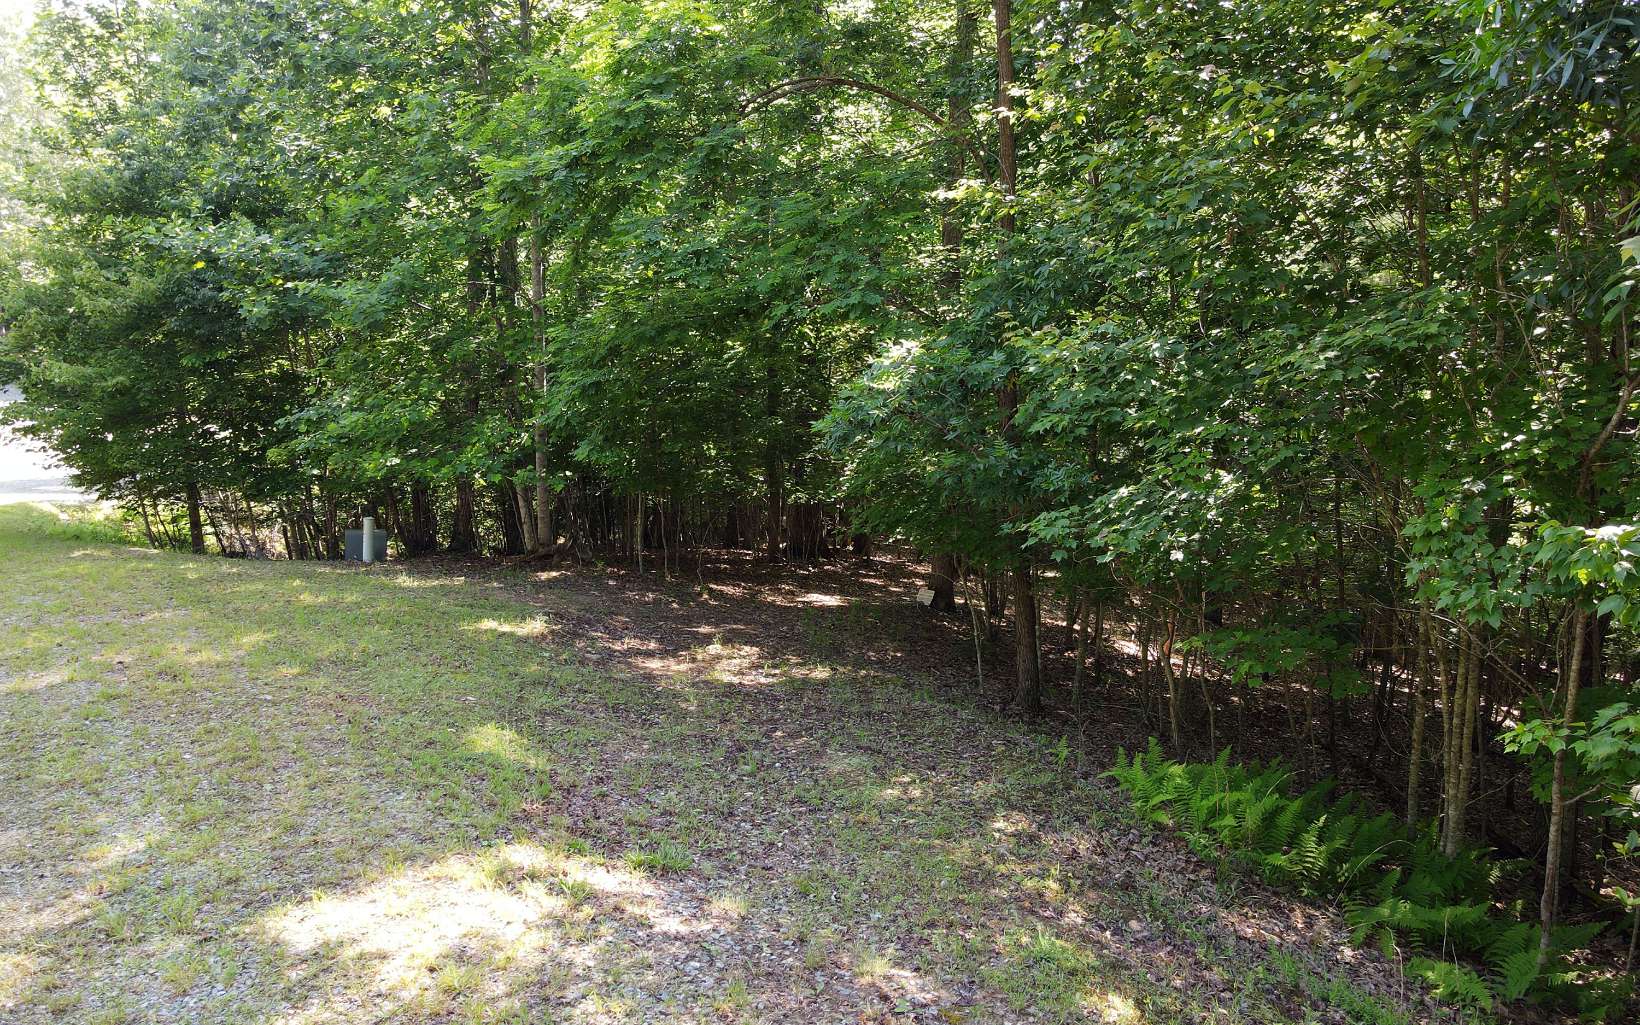 GREAT LOCATION Just minutes from Hwy 515 centrally located between Blue Ridge and Blairsville. Bring your builder and start making your mountain dream come true. This lot has a gentle slope and leads down to a shared pond. Take advantage of all that the area offers: Lake Blue Ridge, Lake Nottely, the Toccoa River, numerous hiking trails, and even Mercier’s Orchards. Don’t miss this great opportunity to invest, build, and/or RENT in this quiet, gated community nestled in the North GA mountains! Short-term rentals are allowed.